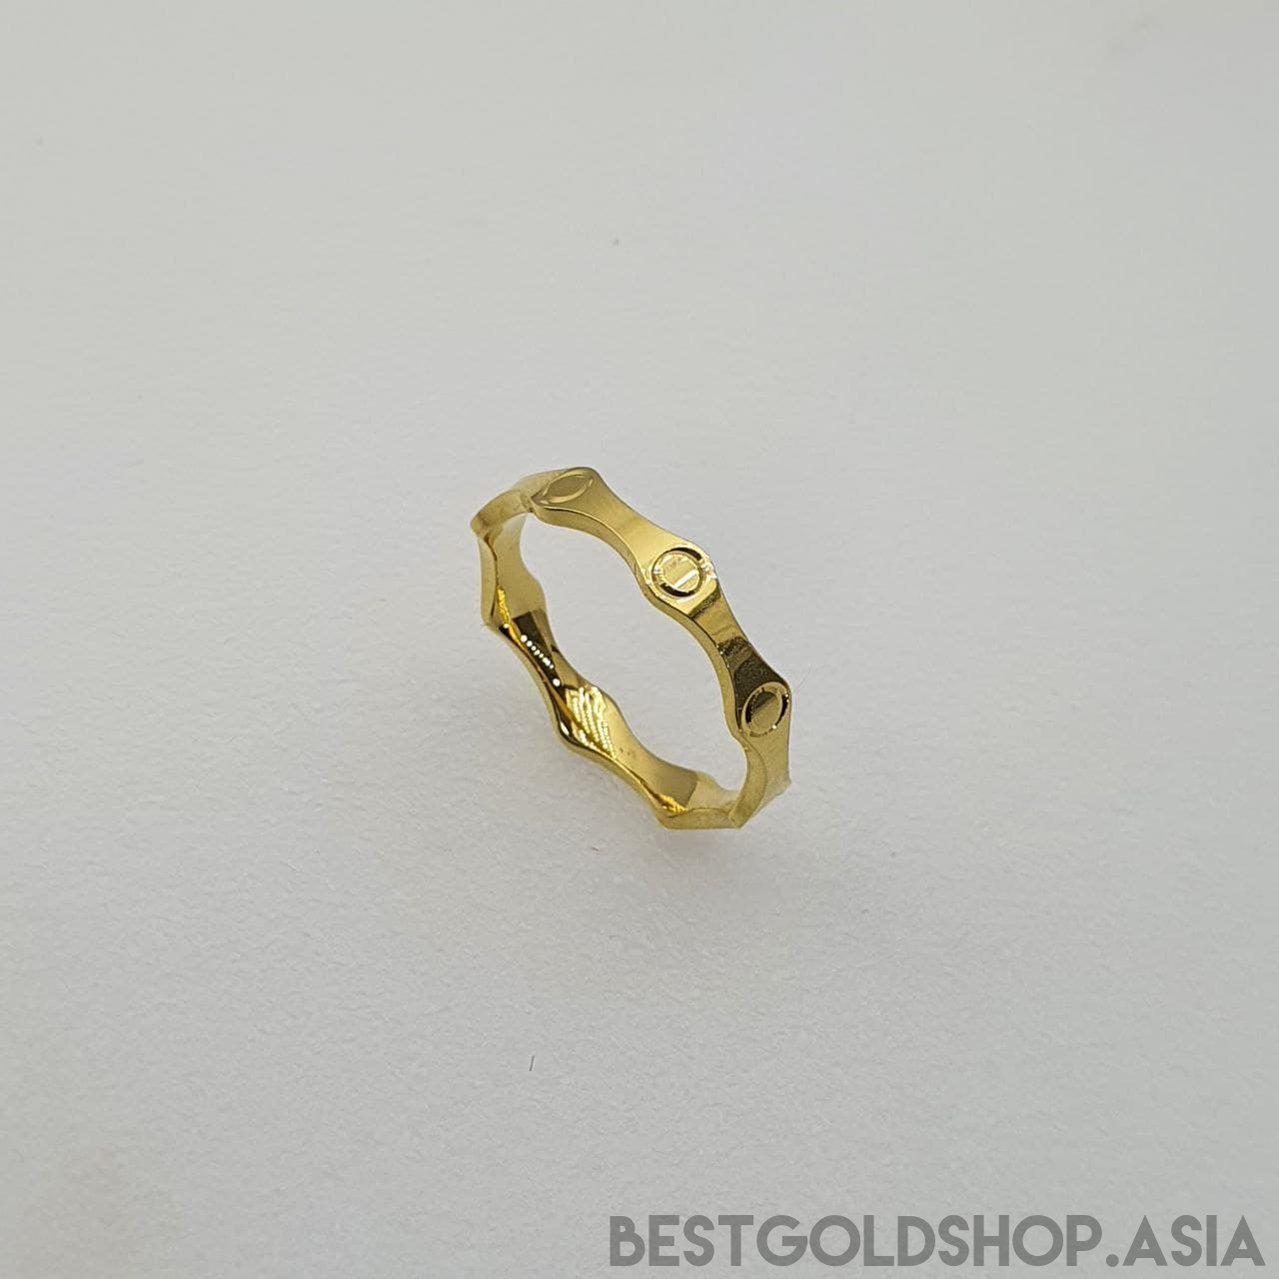 22k / 916 Gold C nail Ring smooth finish-916 gold-Best Gold Shop